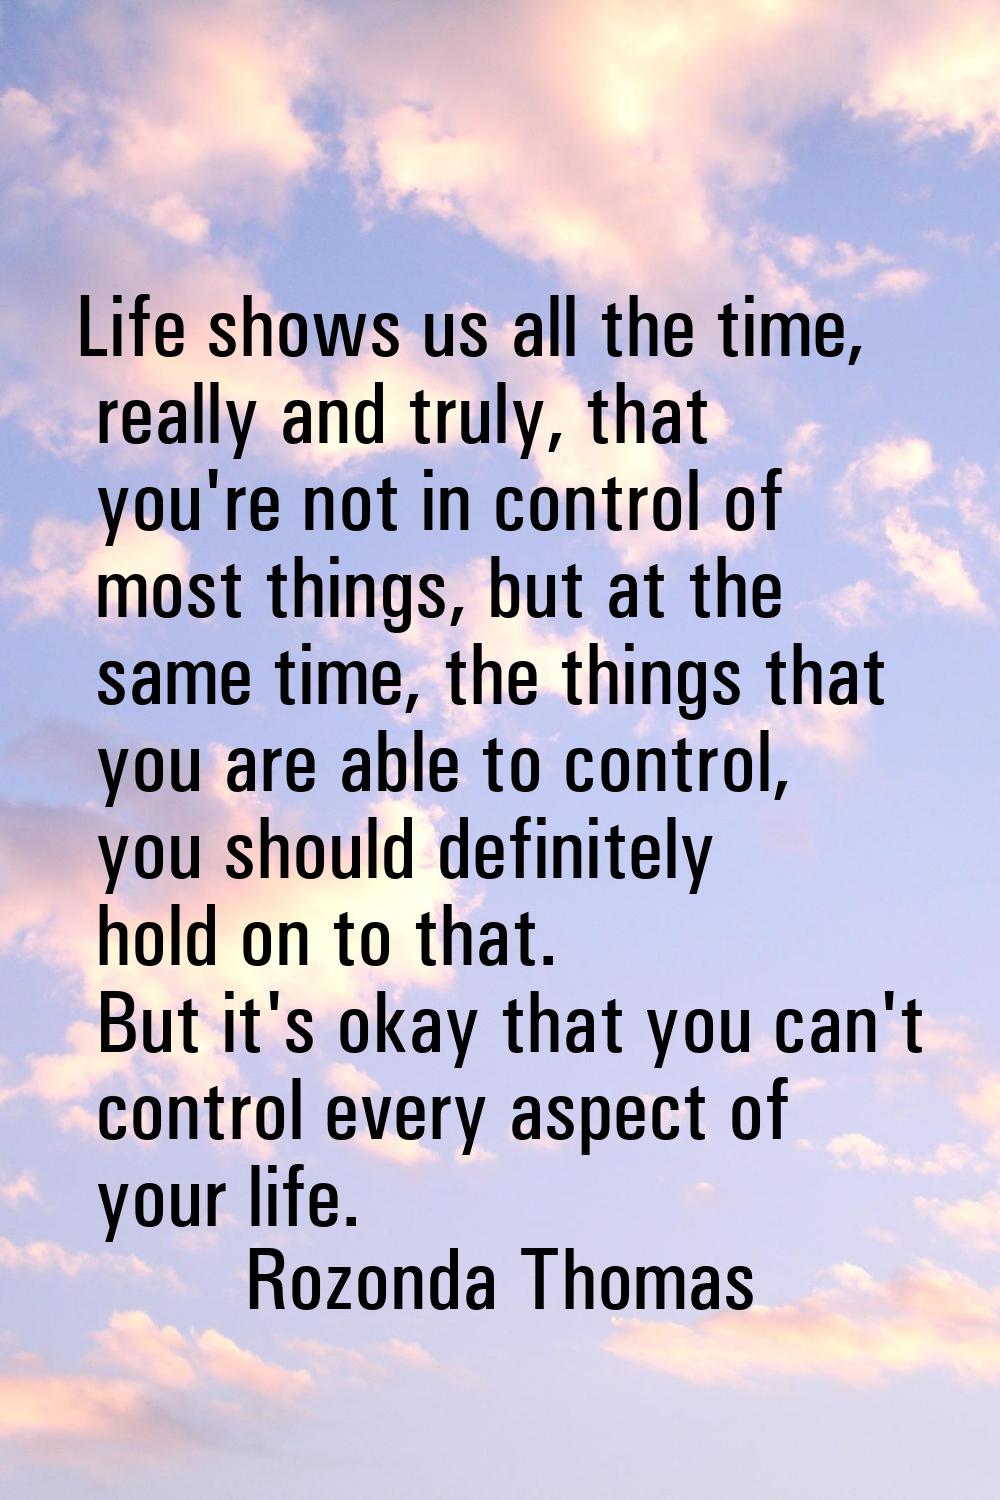 Life shows us all the time, really and truly, that you're not in control of most things, but at the